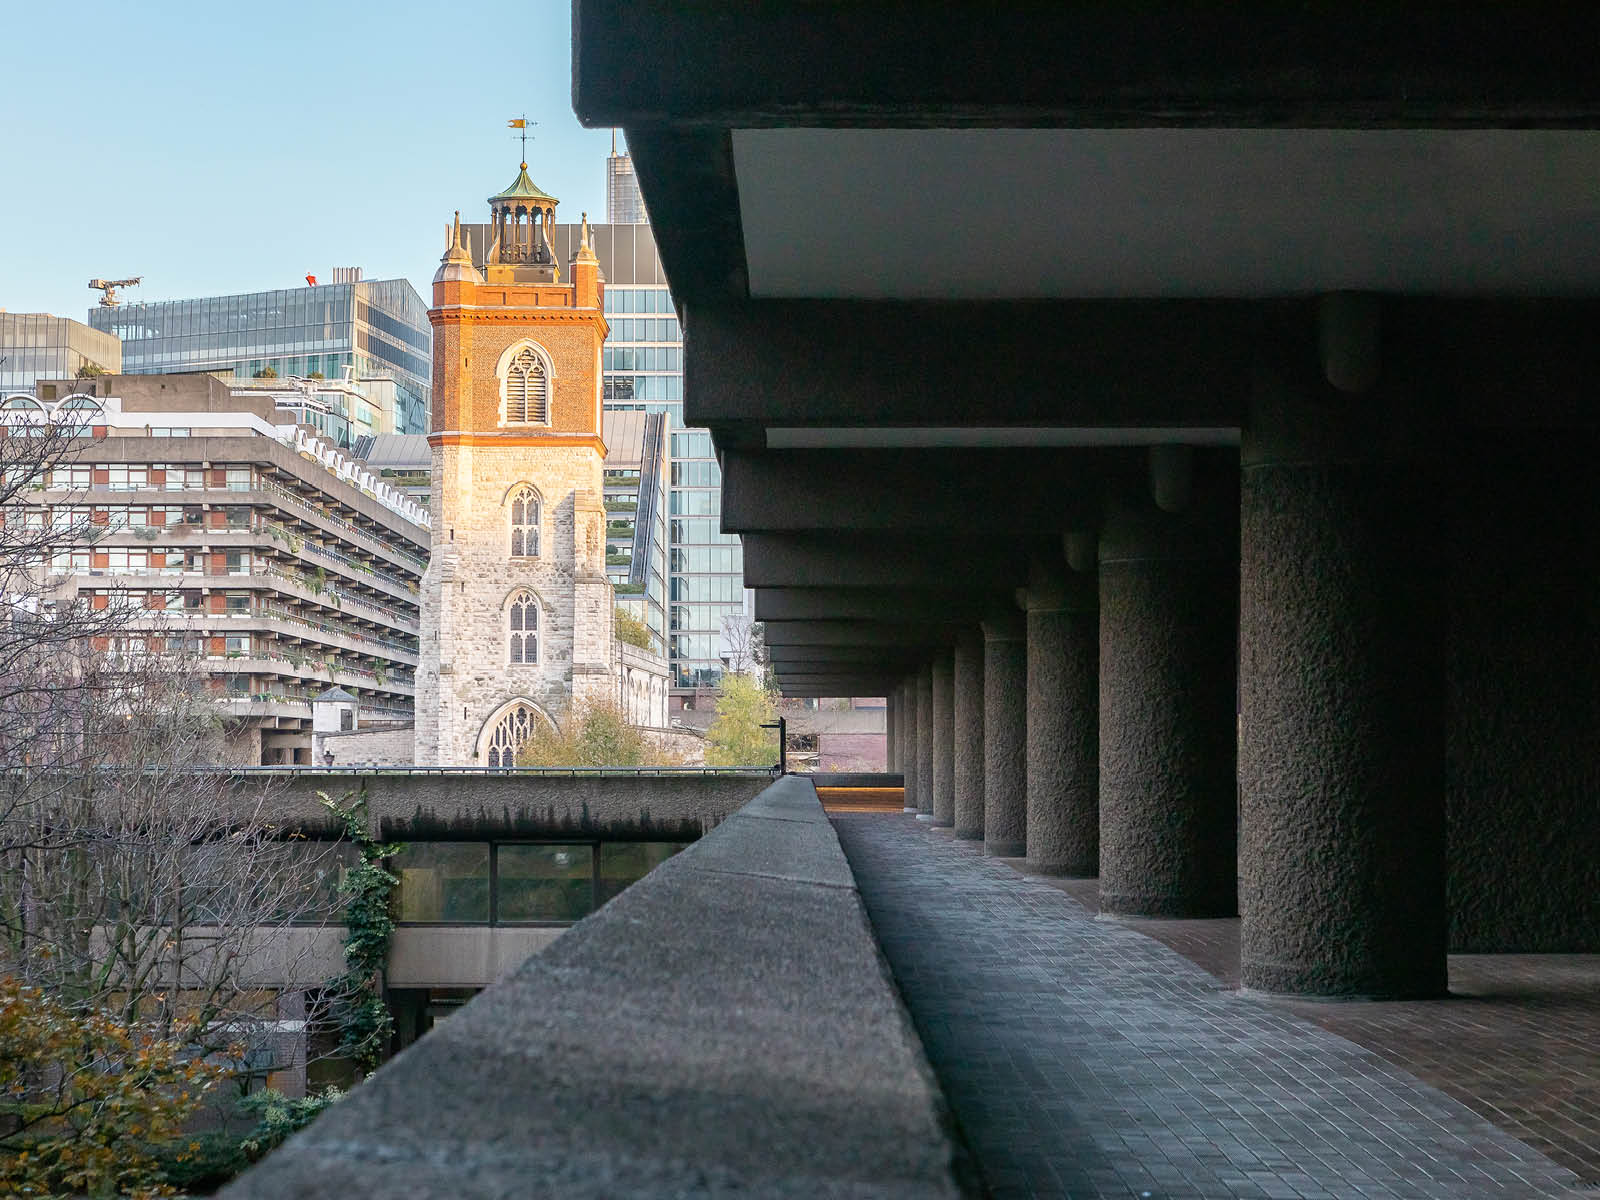 Looking down concrete walkway with Church in backdrop